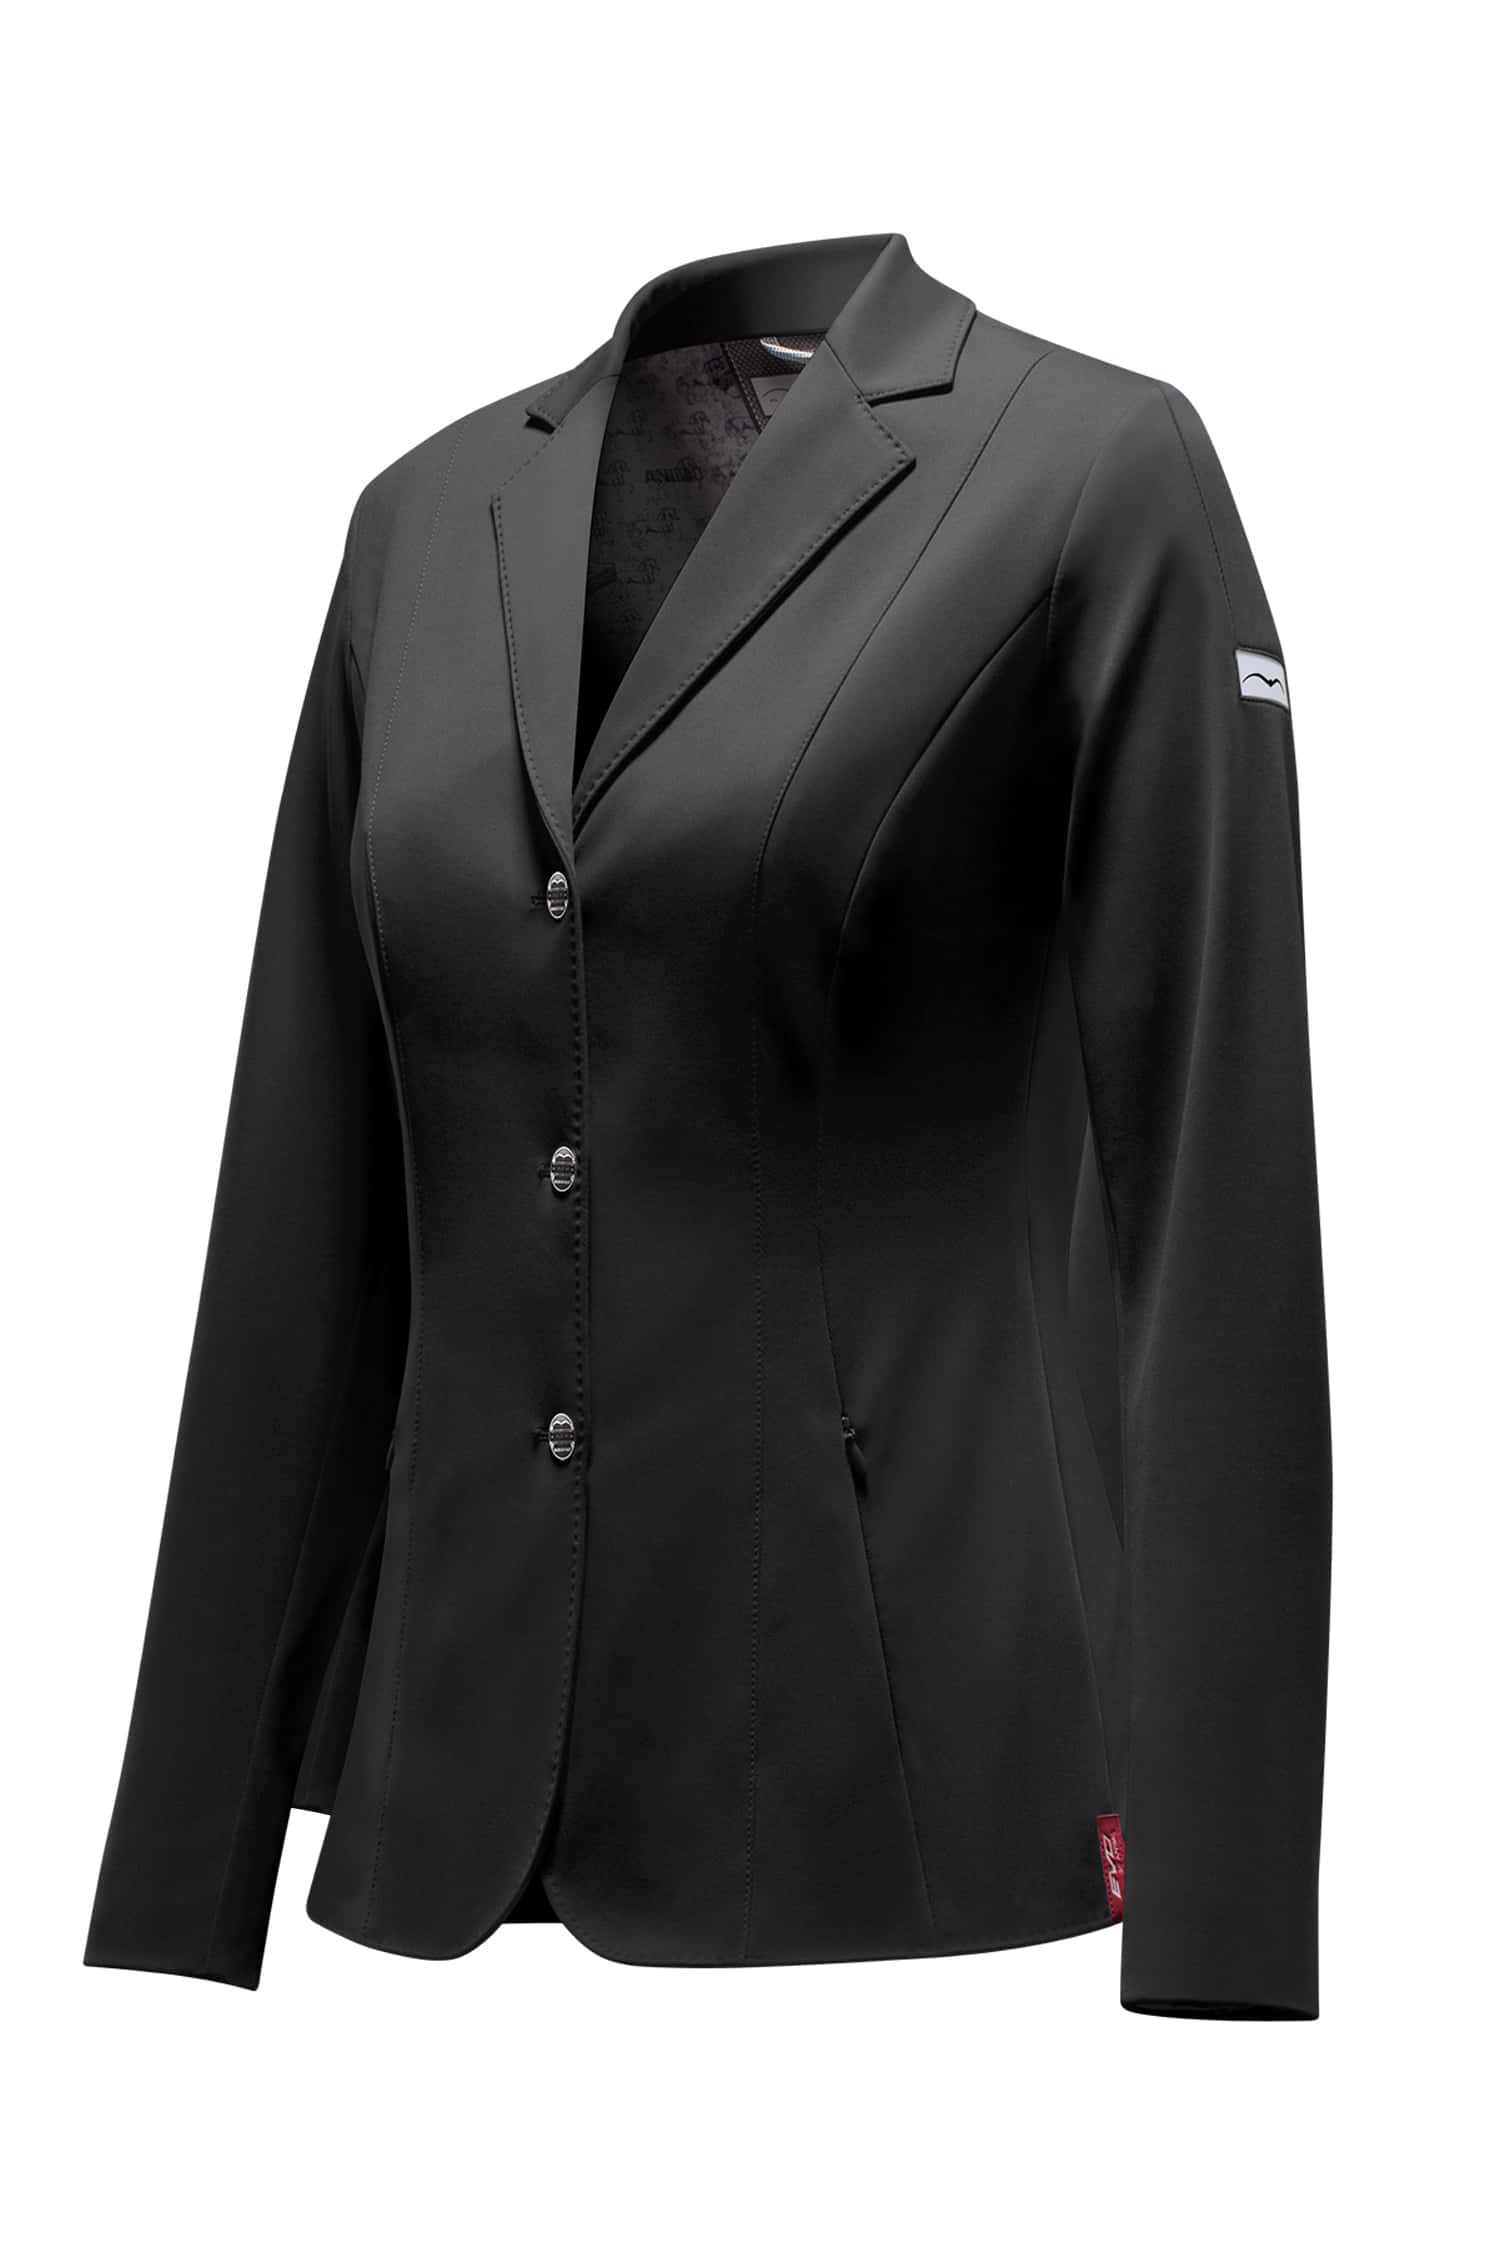 Animo Lud Black Womens Competition Jacket